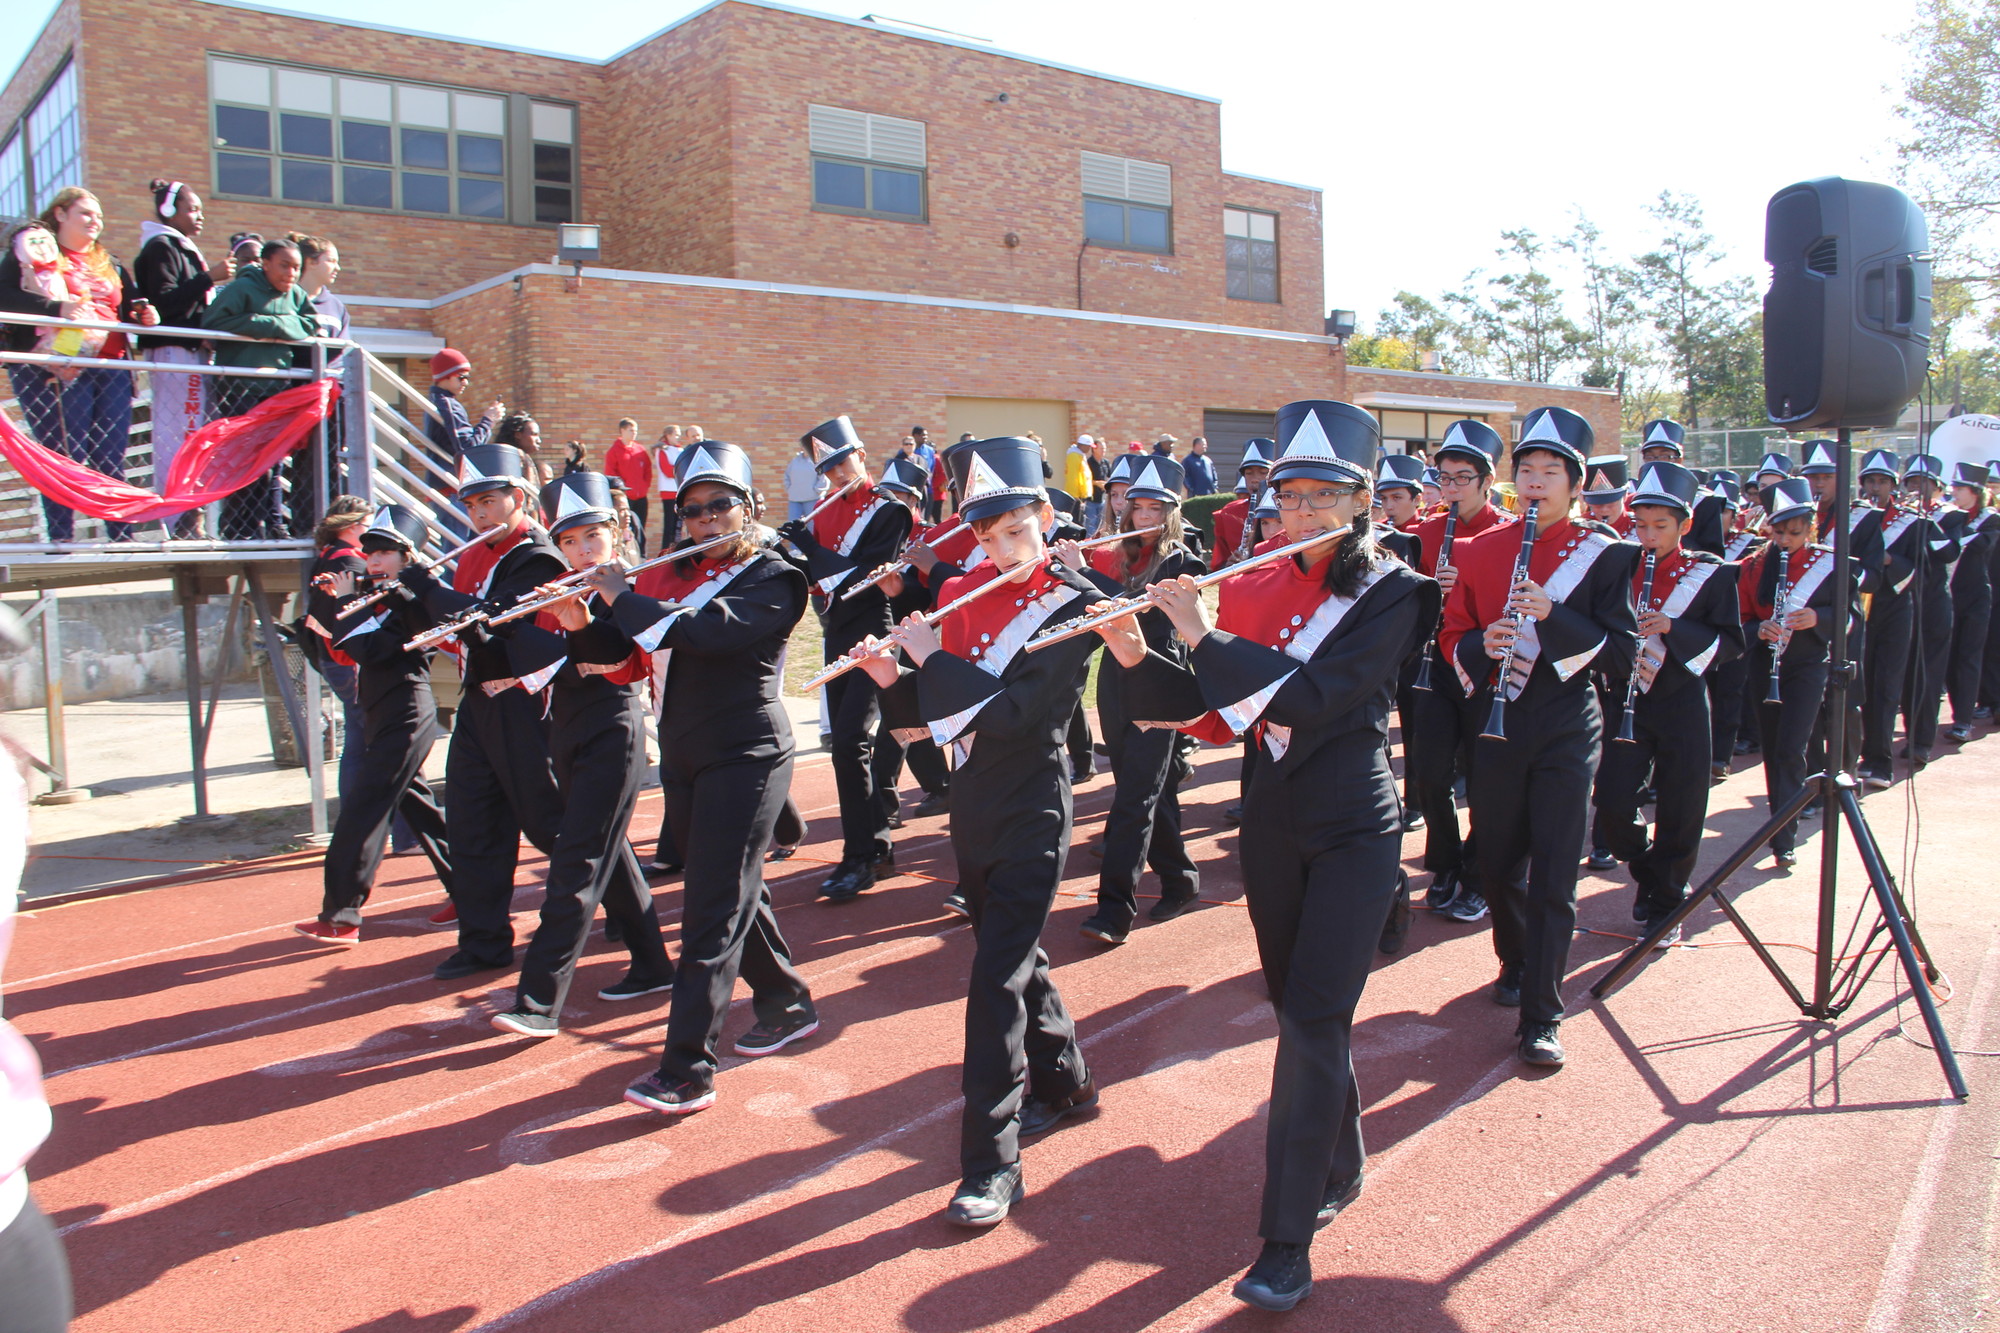 The South High School marching band entertained the crowd.